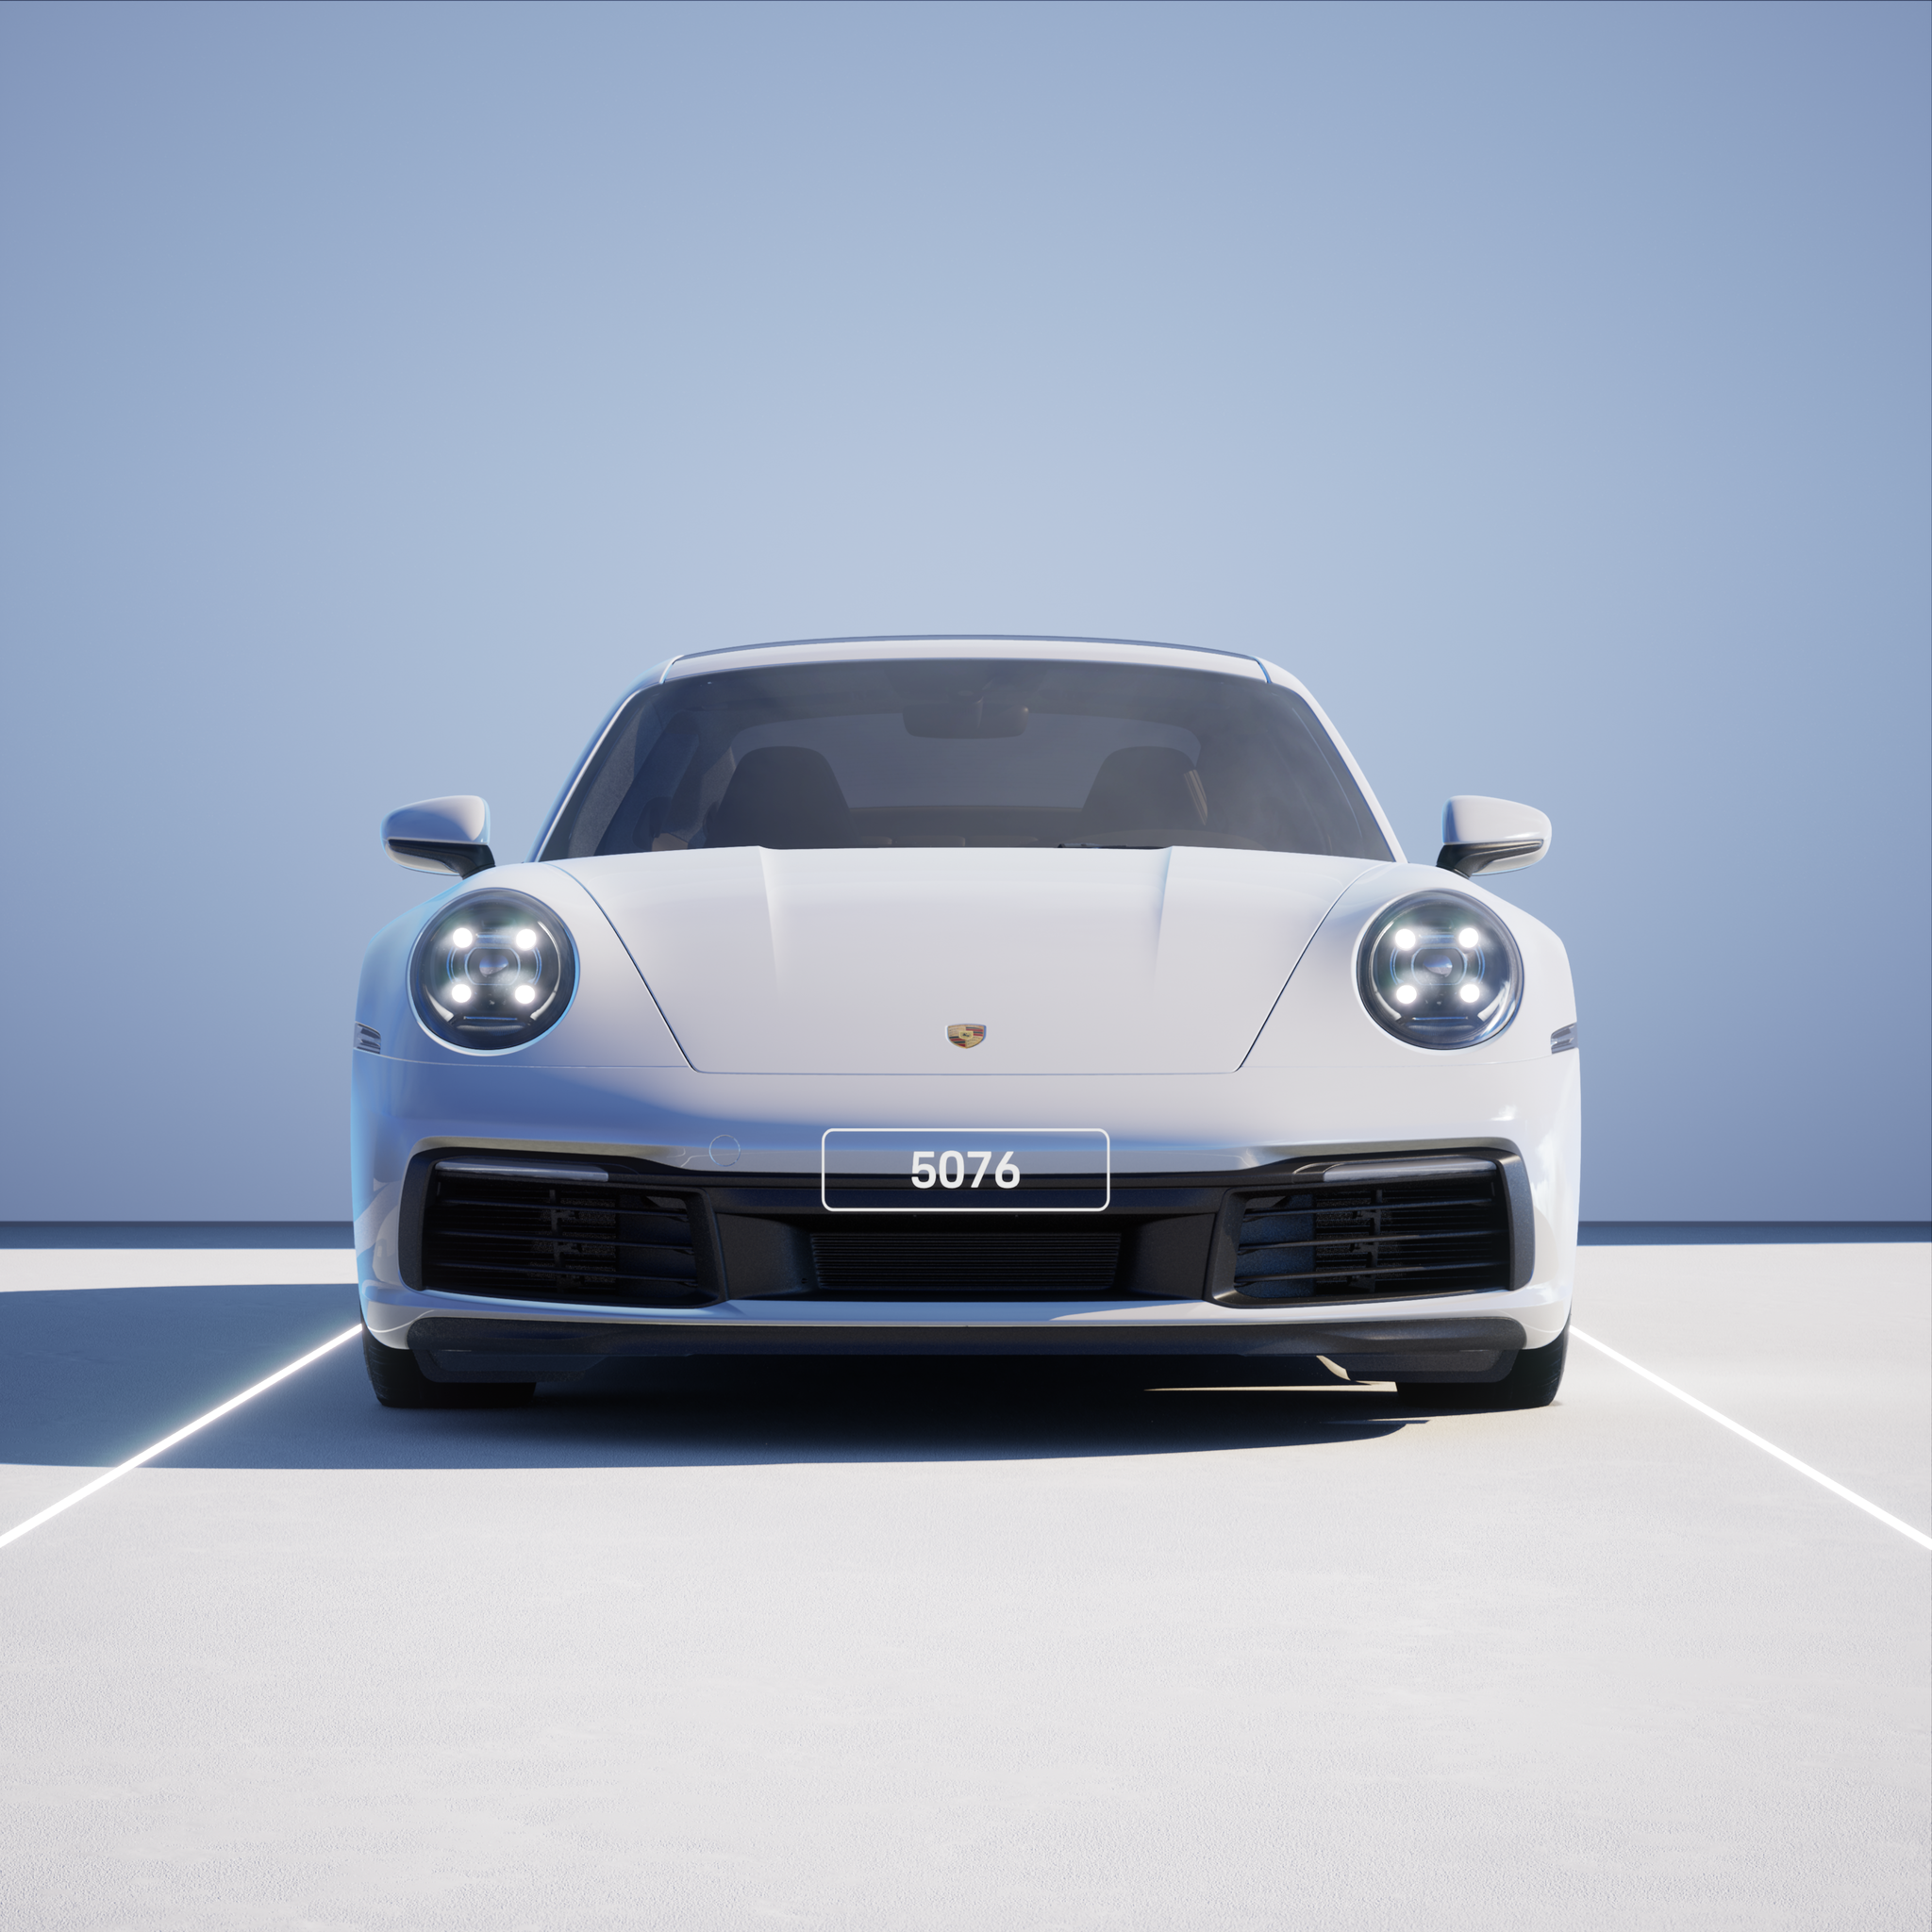 The PORSCHΞ 911 5076 image in phase